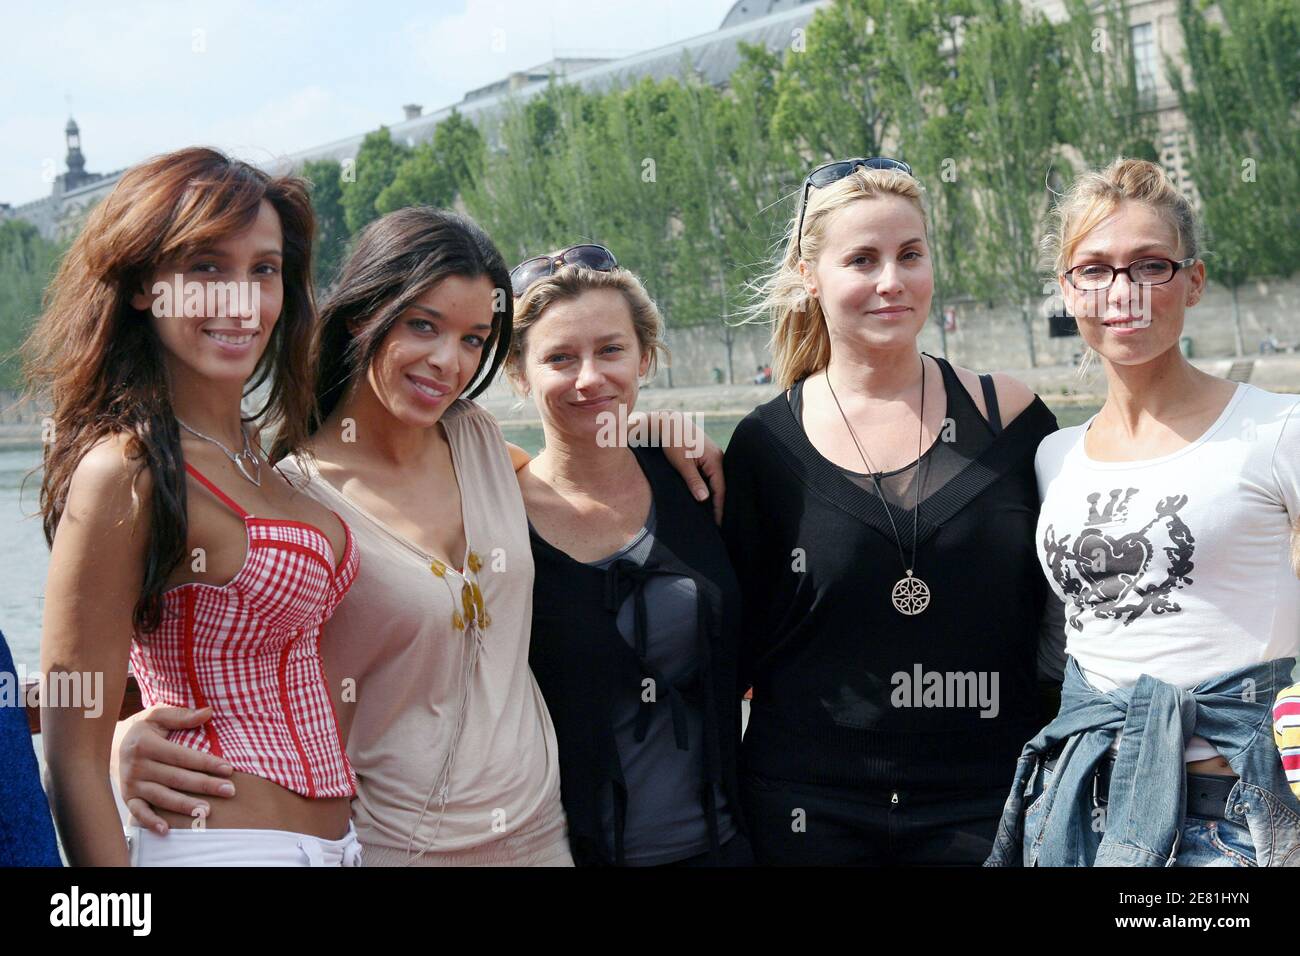 Former contestant of TV reality show 'L'Ile de la tentation' Diana Jones, actress Valerie Payet, TV presenter Sophie Favier and singer Indra attend the Tennesse cruse in Paris, France, on May 23, 2007. This party is each year organized by 'Louis Carlesimo' caritative association to enjoy seriously ill children. Photo by Corentin Fohlen/ABACAPRESS.COM Stock Photo